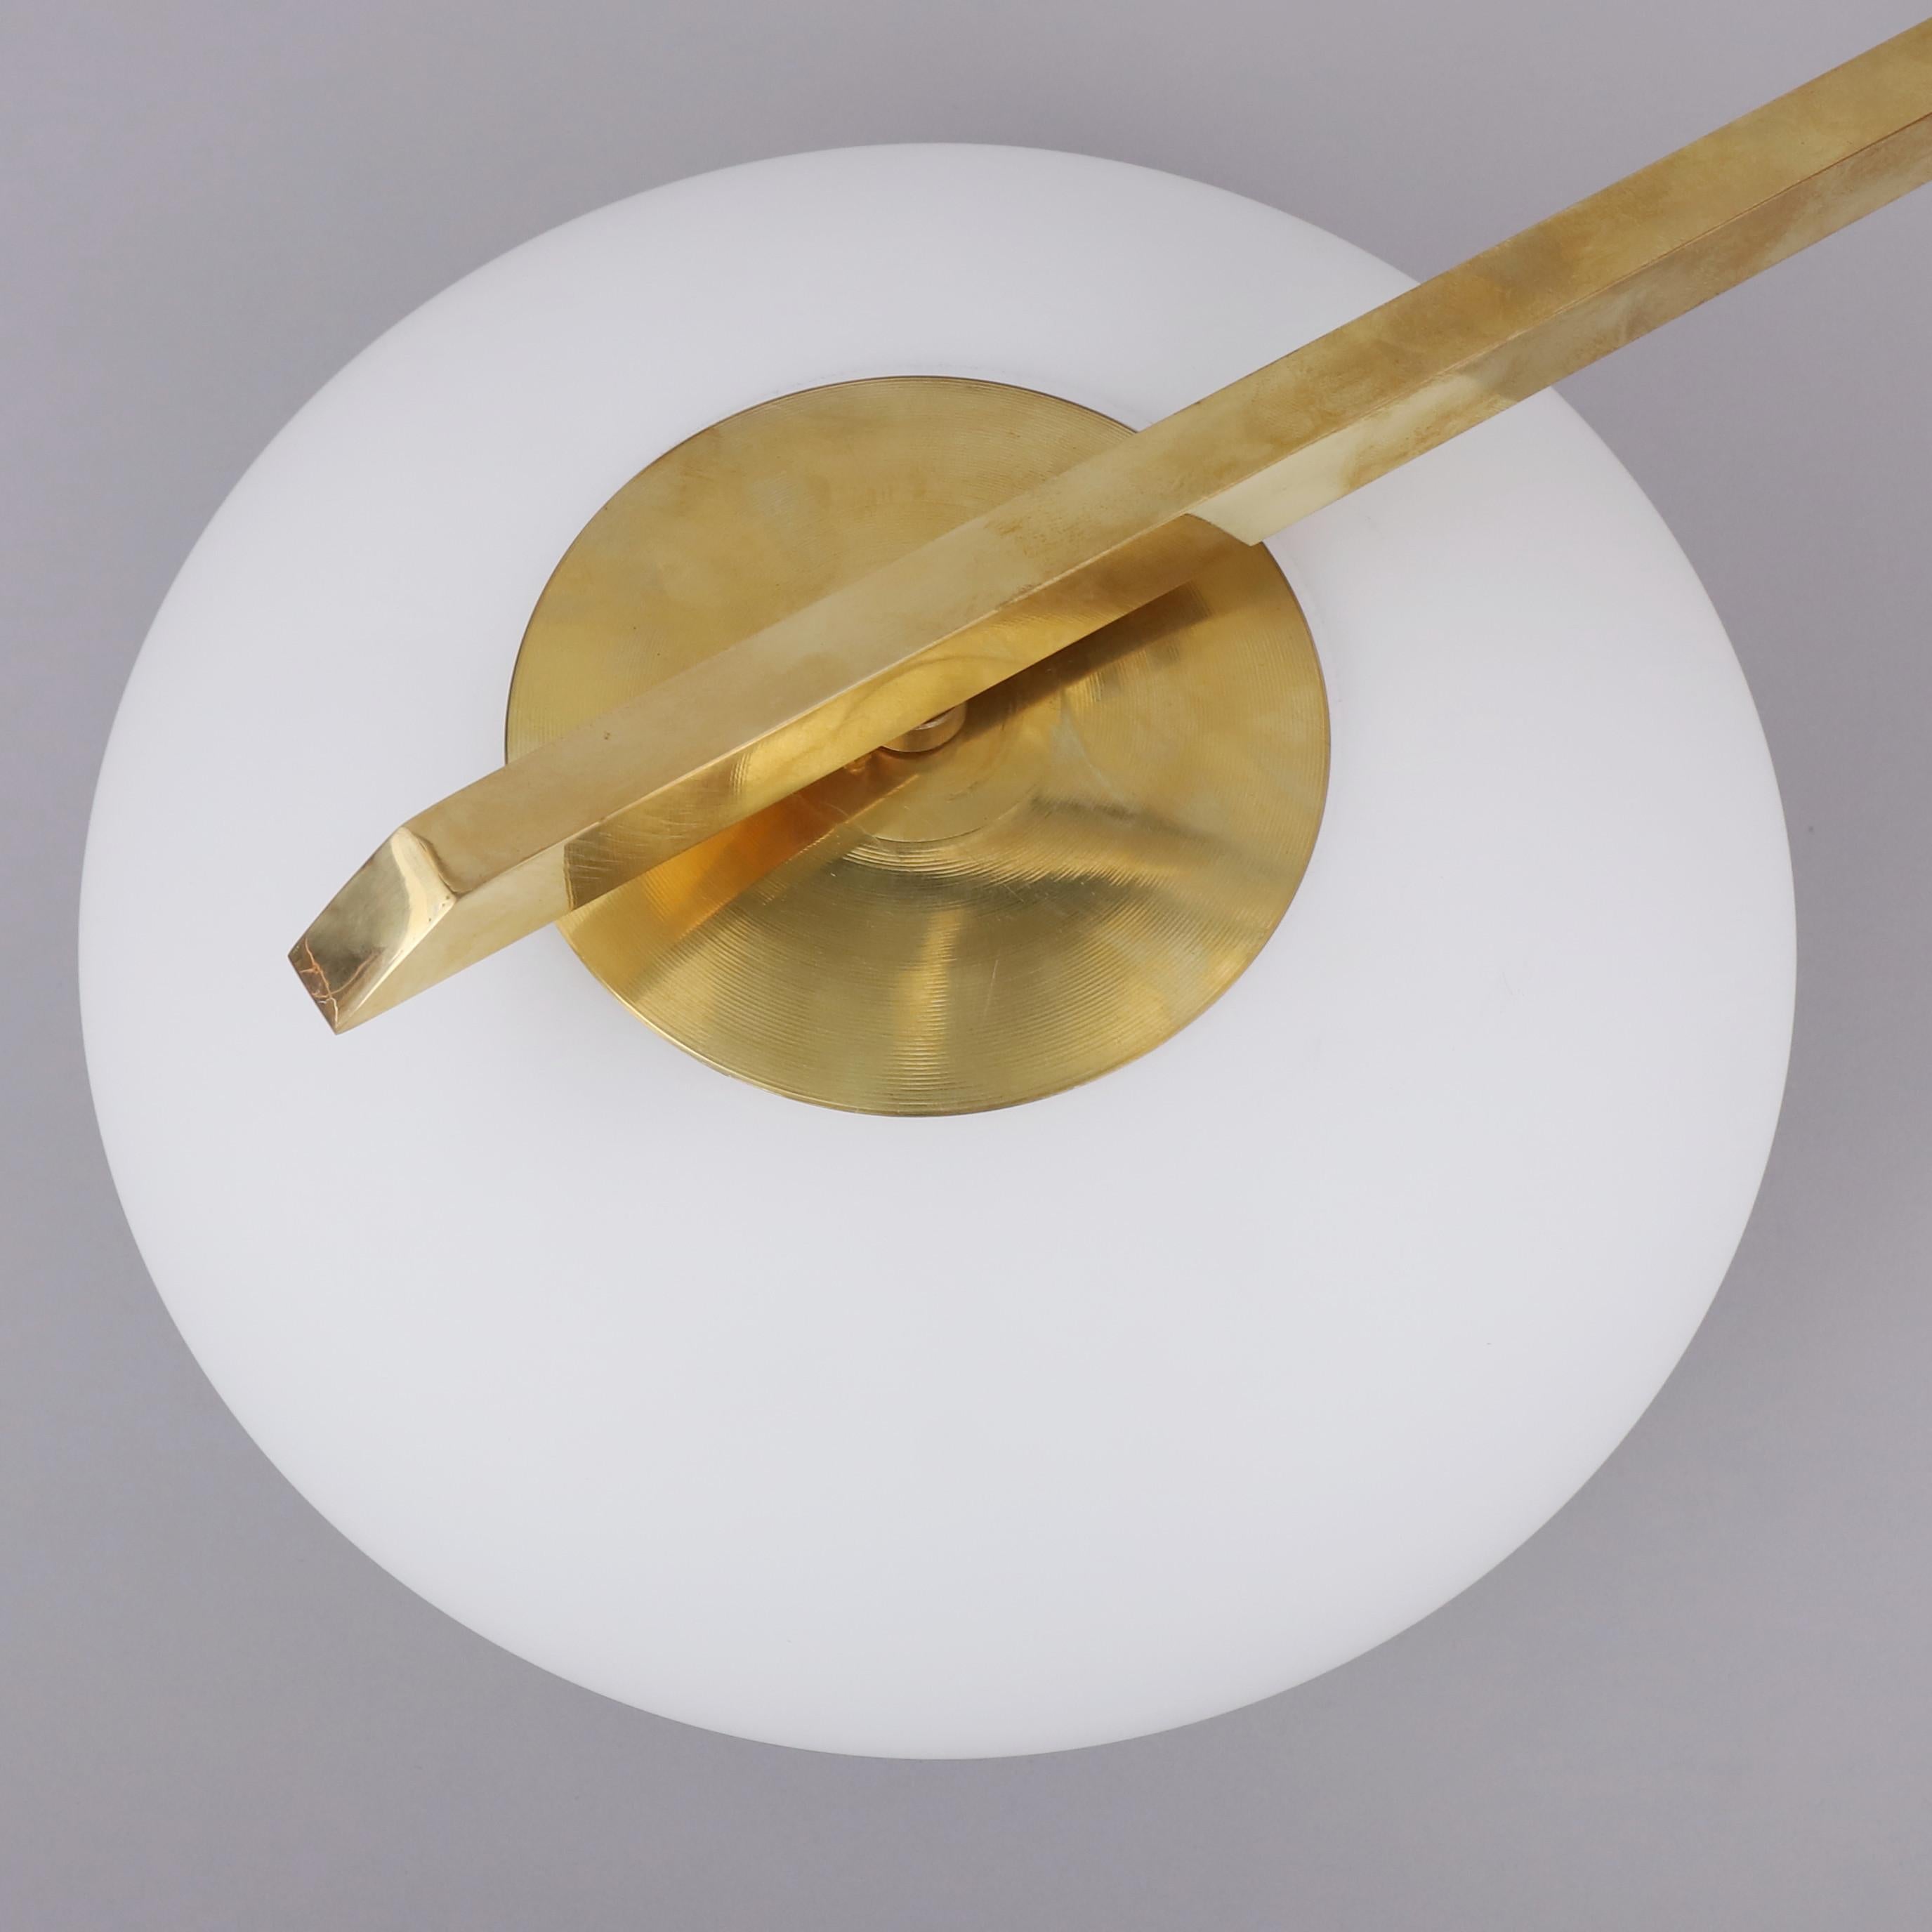 Ceiling light wall light in the style of Angelo Lelli For Arredoluce a recent edition made in Italy circa 1990/2000. No signature 
This asymmetric model can be use as a ceiling lamp or a wall light.
Made of brass and 2 opalin white glass to hide